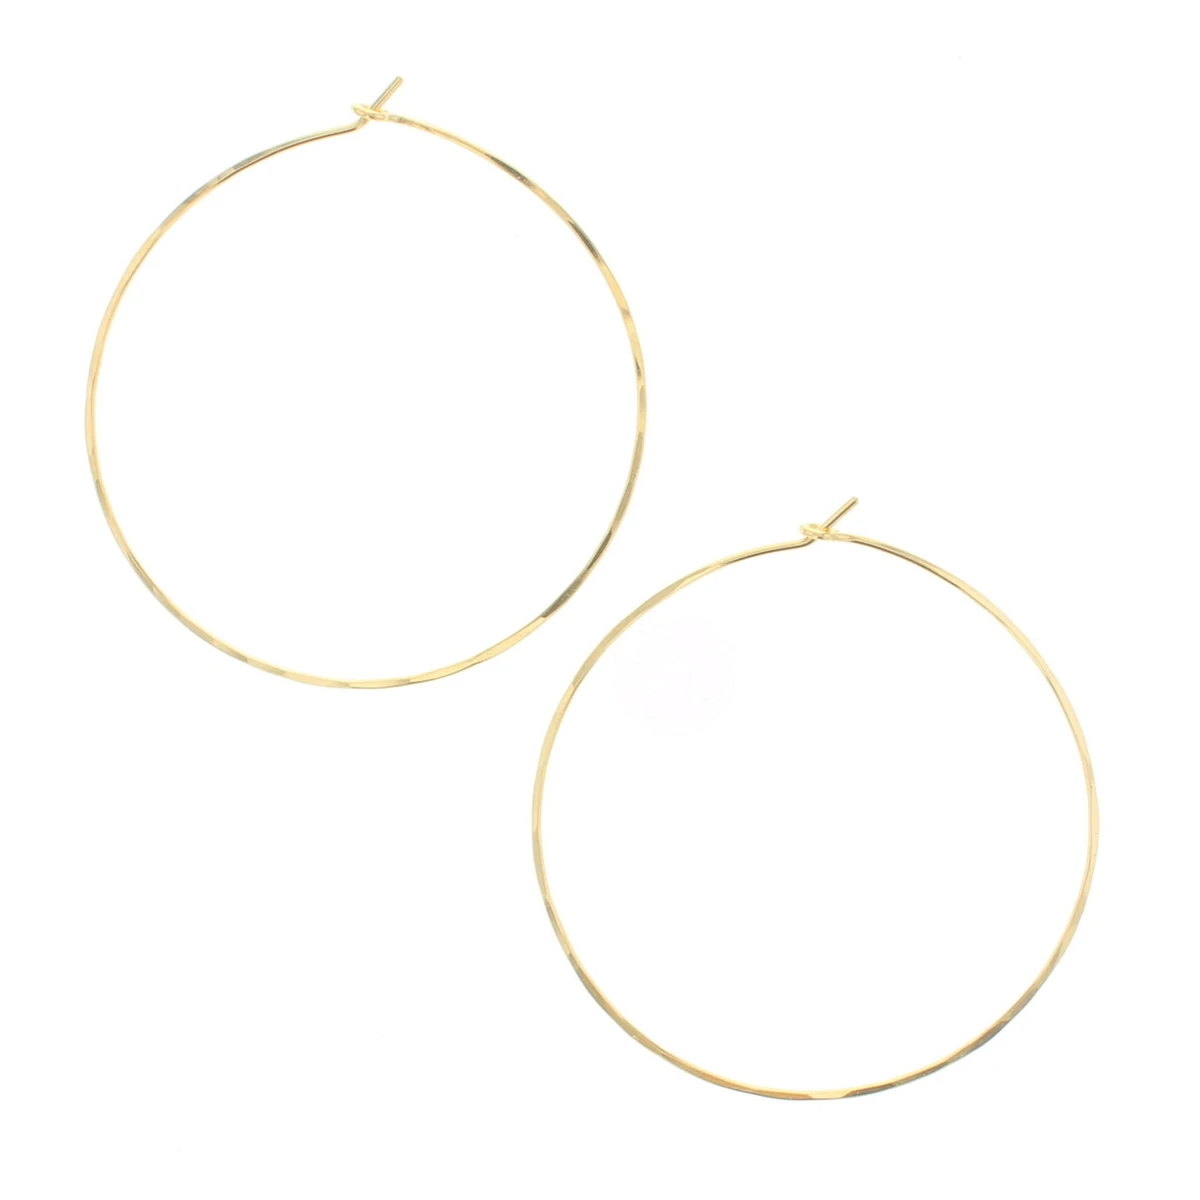 Round Hoops in Gold